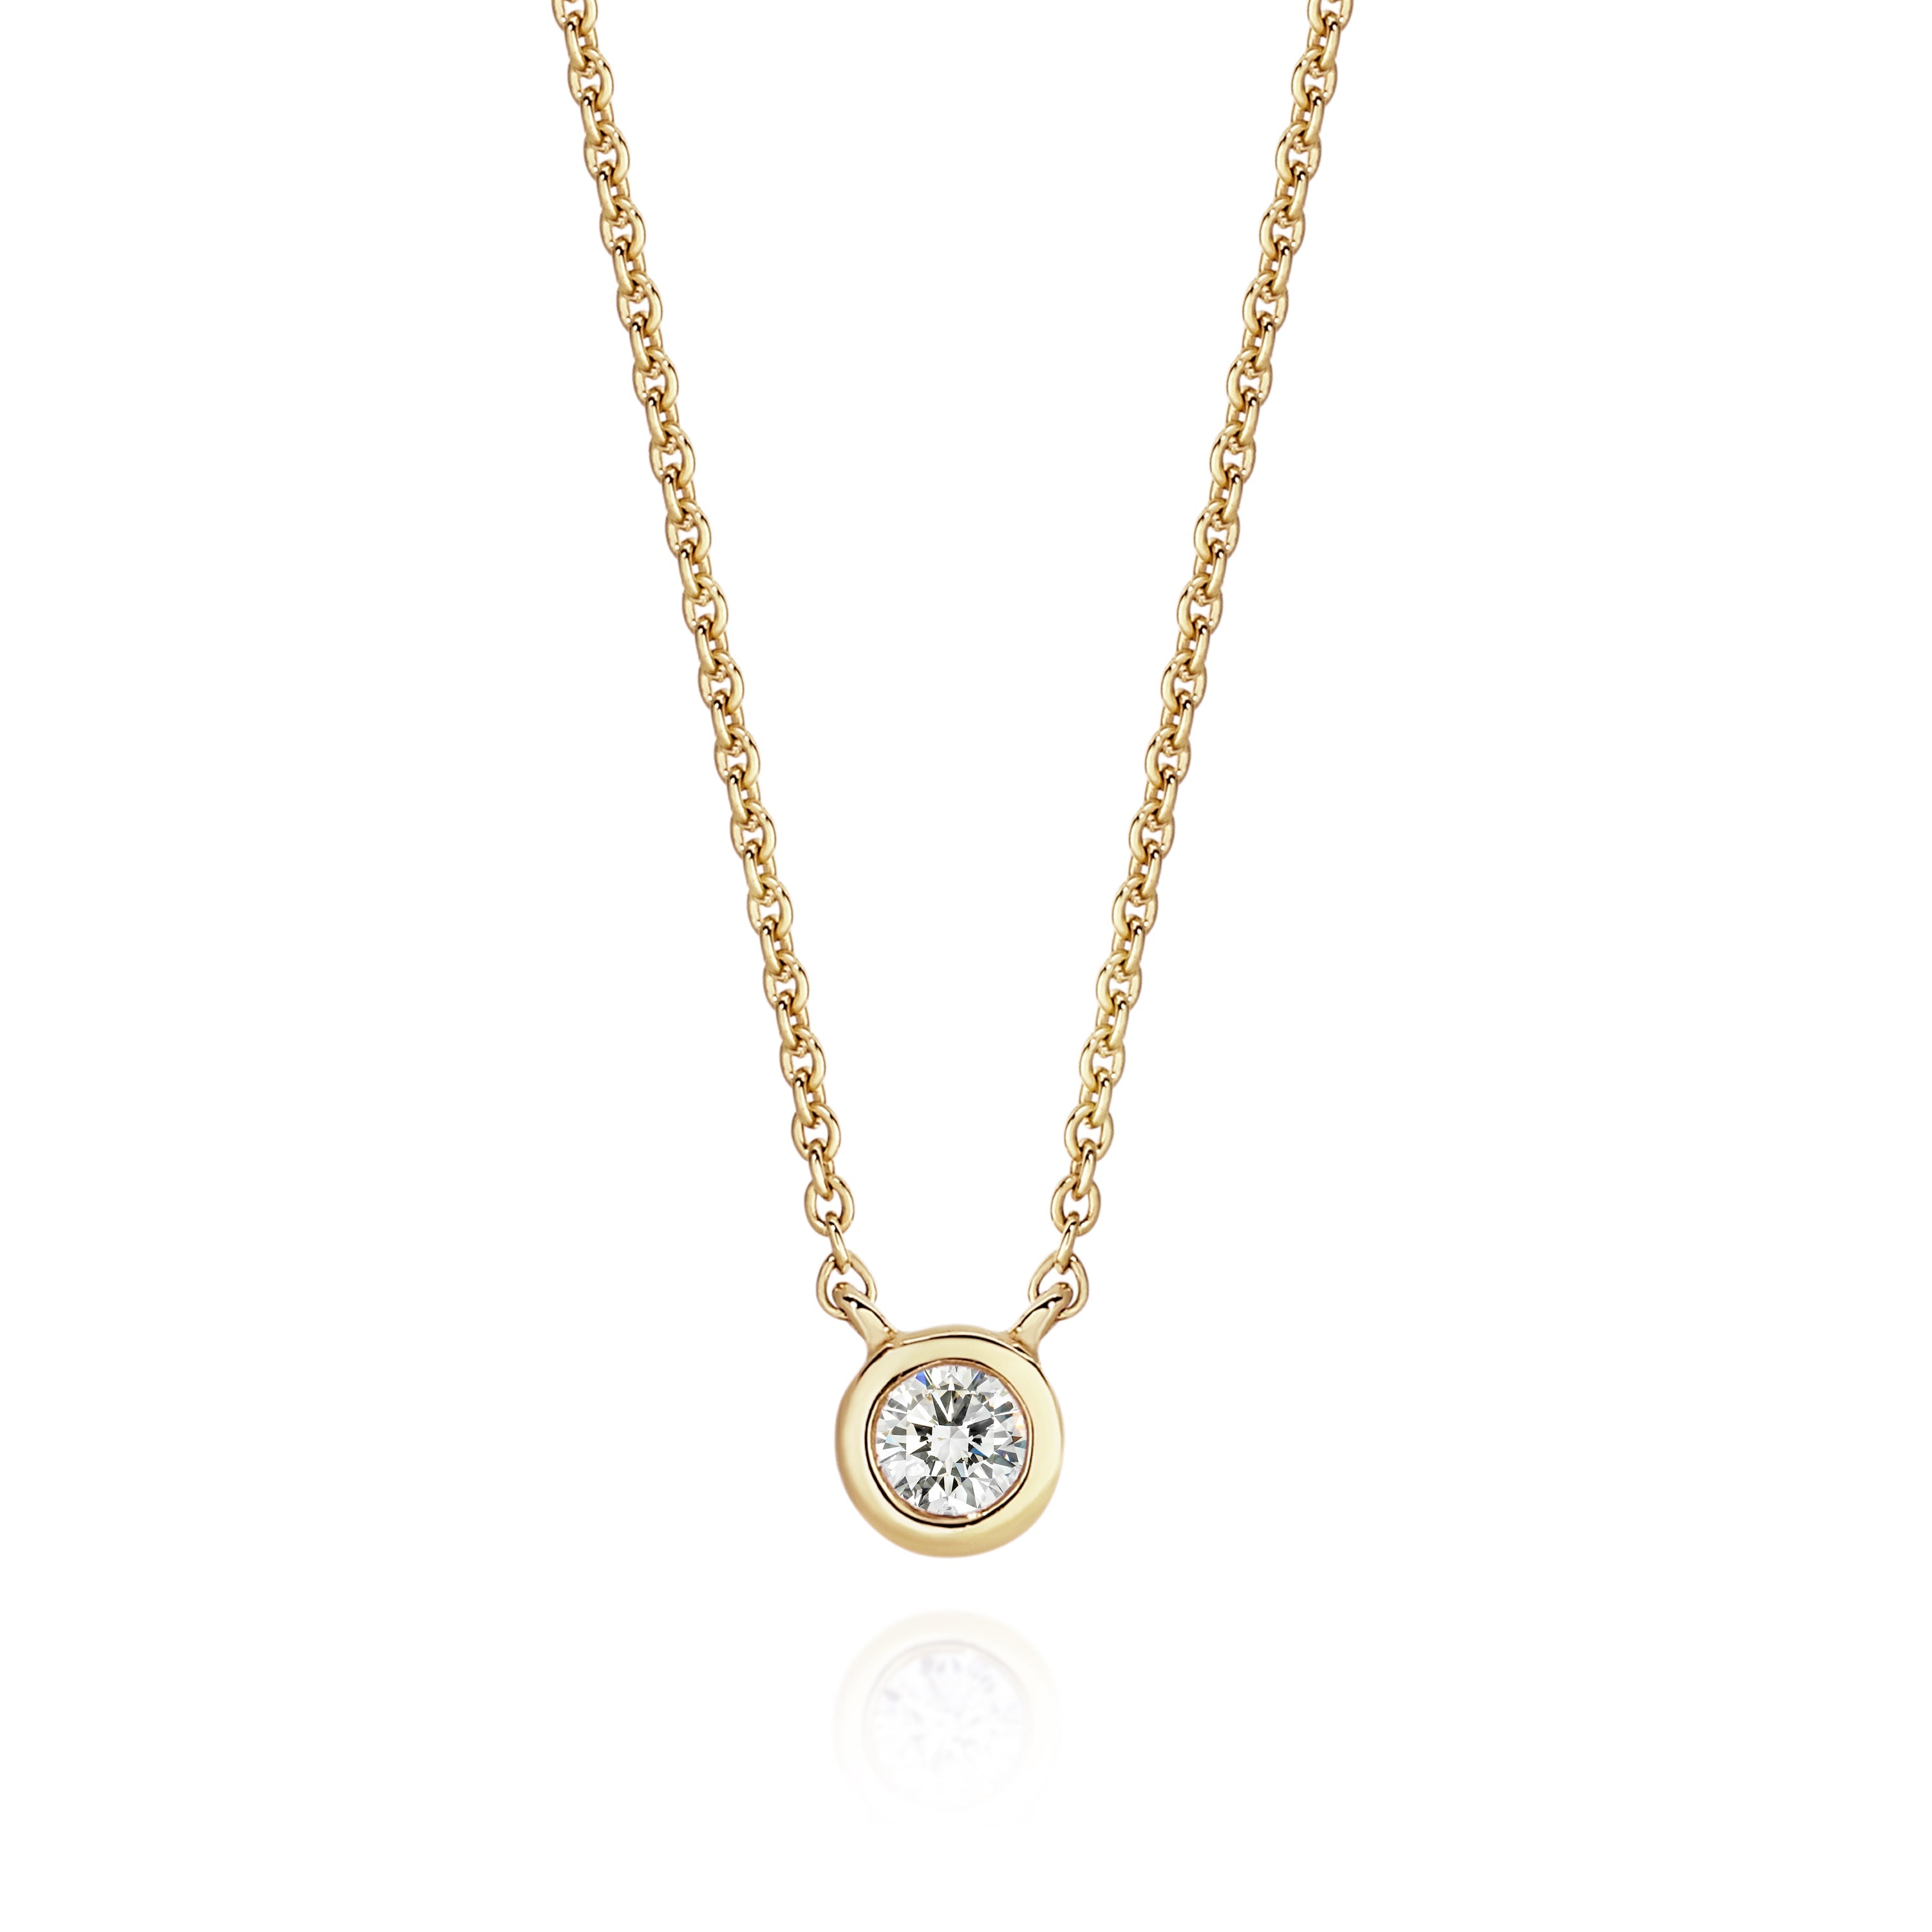 9ct 0.07ct floating diamond pendant with 9ct chain